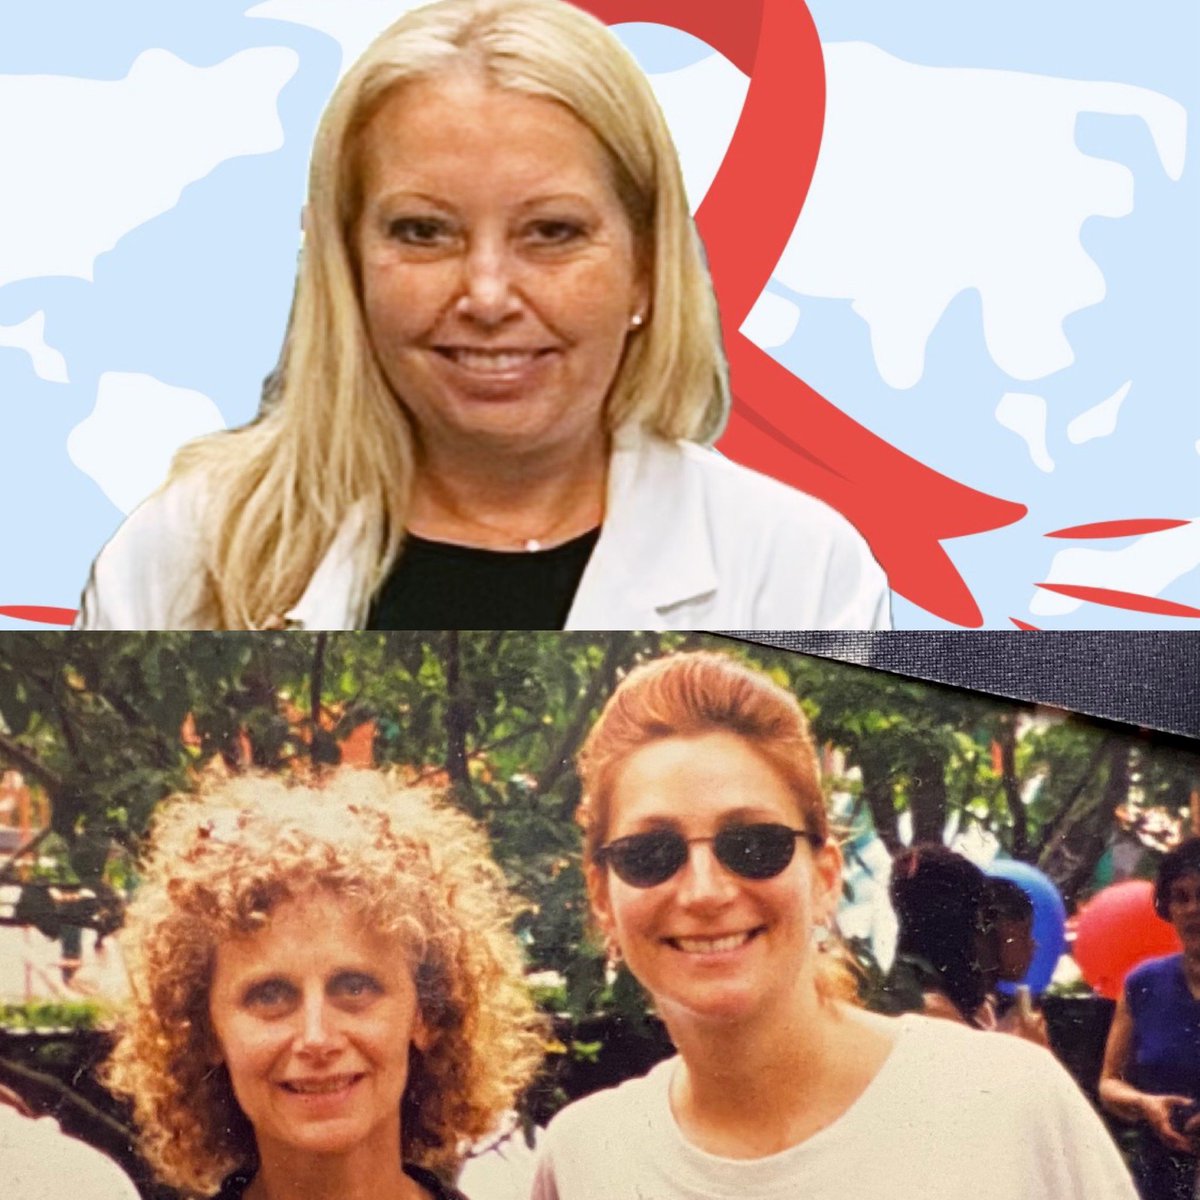 As @nursesweek2024 comes to a close, I’d like to honor 3 of the greatest, most compassionate nurses I’ve been lucky enough to work with - here’s to you Brianne, Gabriella and Donna!